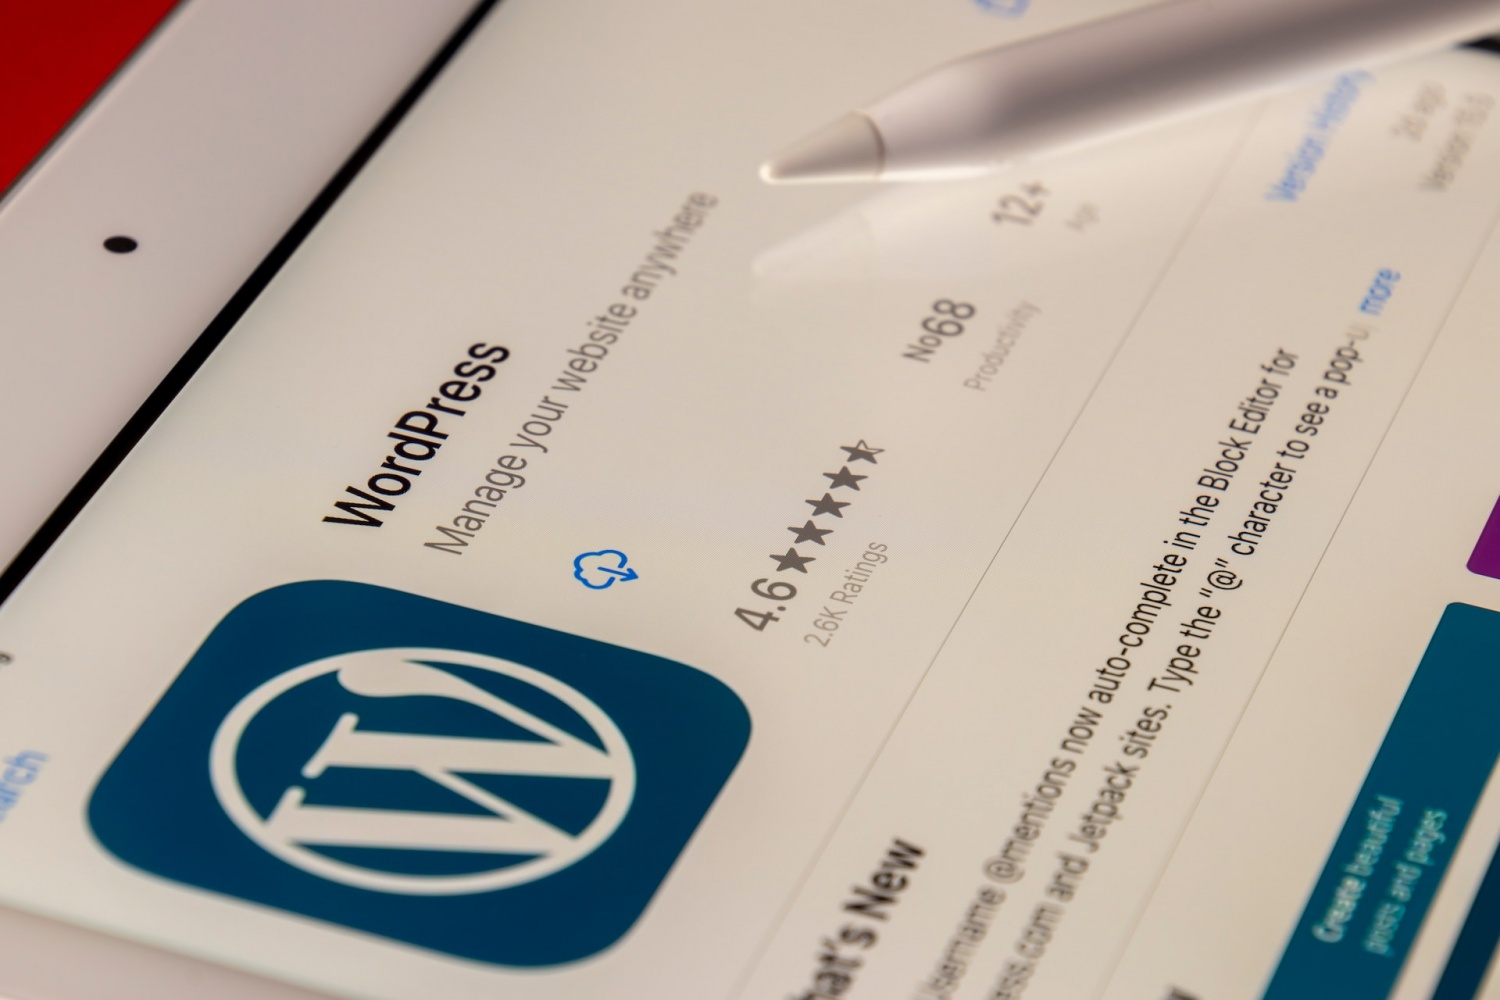 WordPress Makes Blog Writing Easier with JetPack AI